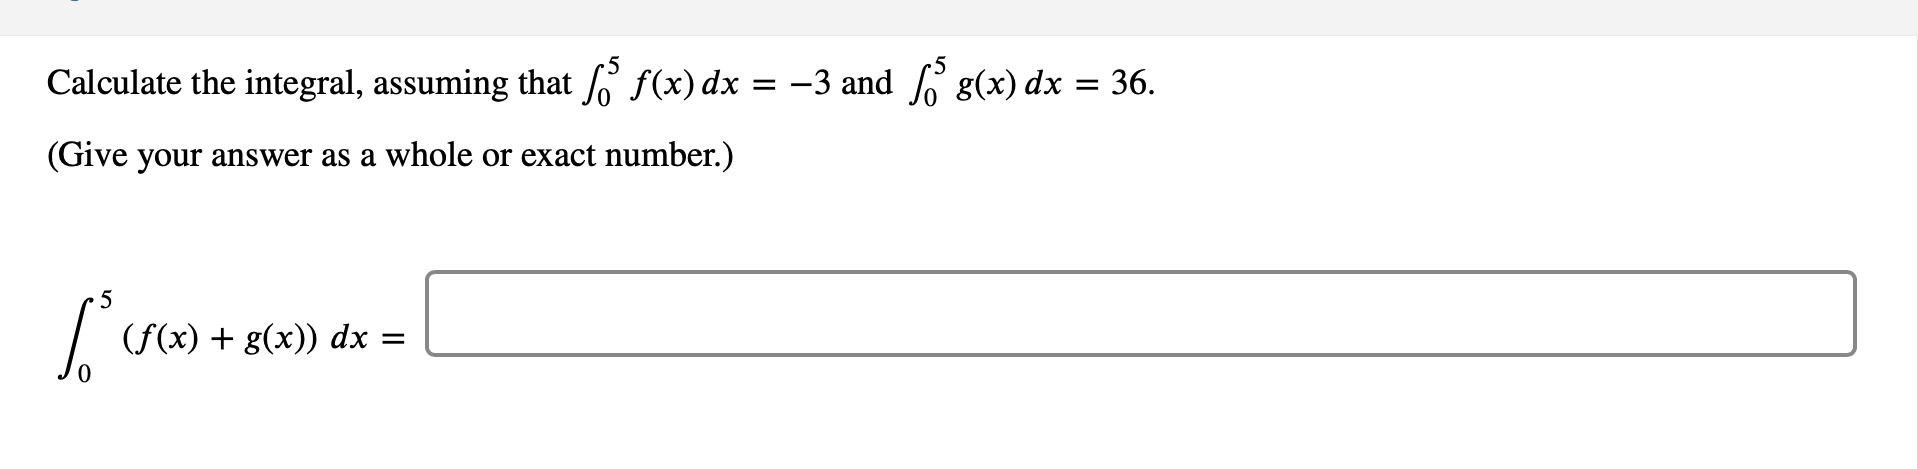 Calculate the integral, assuming that L' f(x) dx
= -3 and 6 g(x) dx
36.
(Give your answer as a whole or exact number.)
(f(x) + g(x)) dx =
